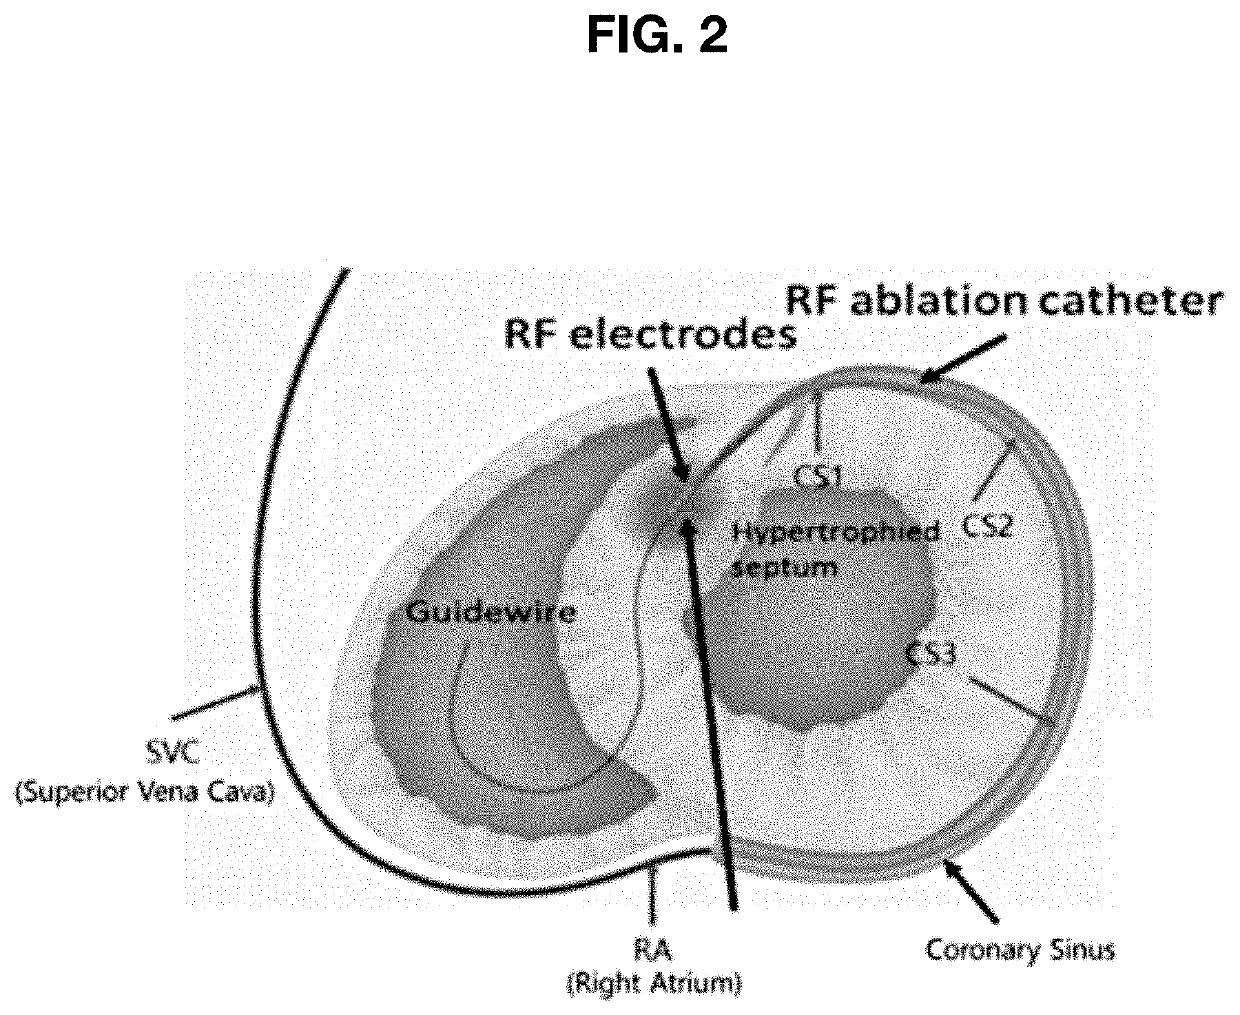 RF ablation catheter for septal reduction therapy having cooling effect